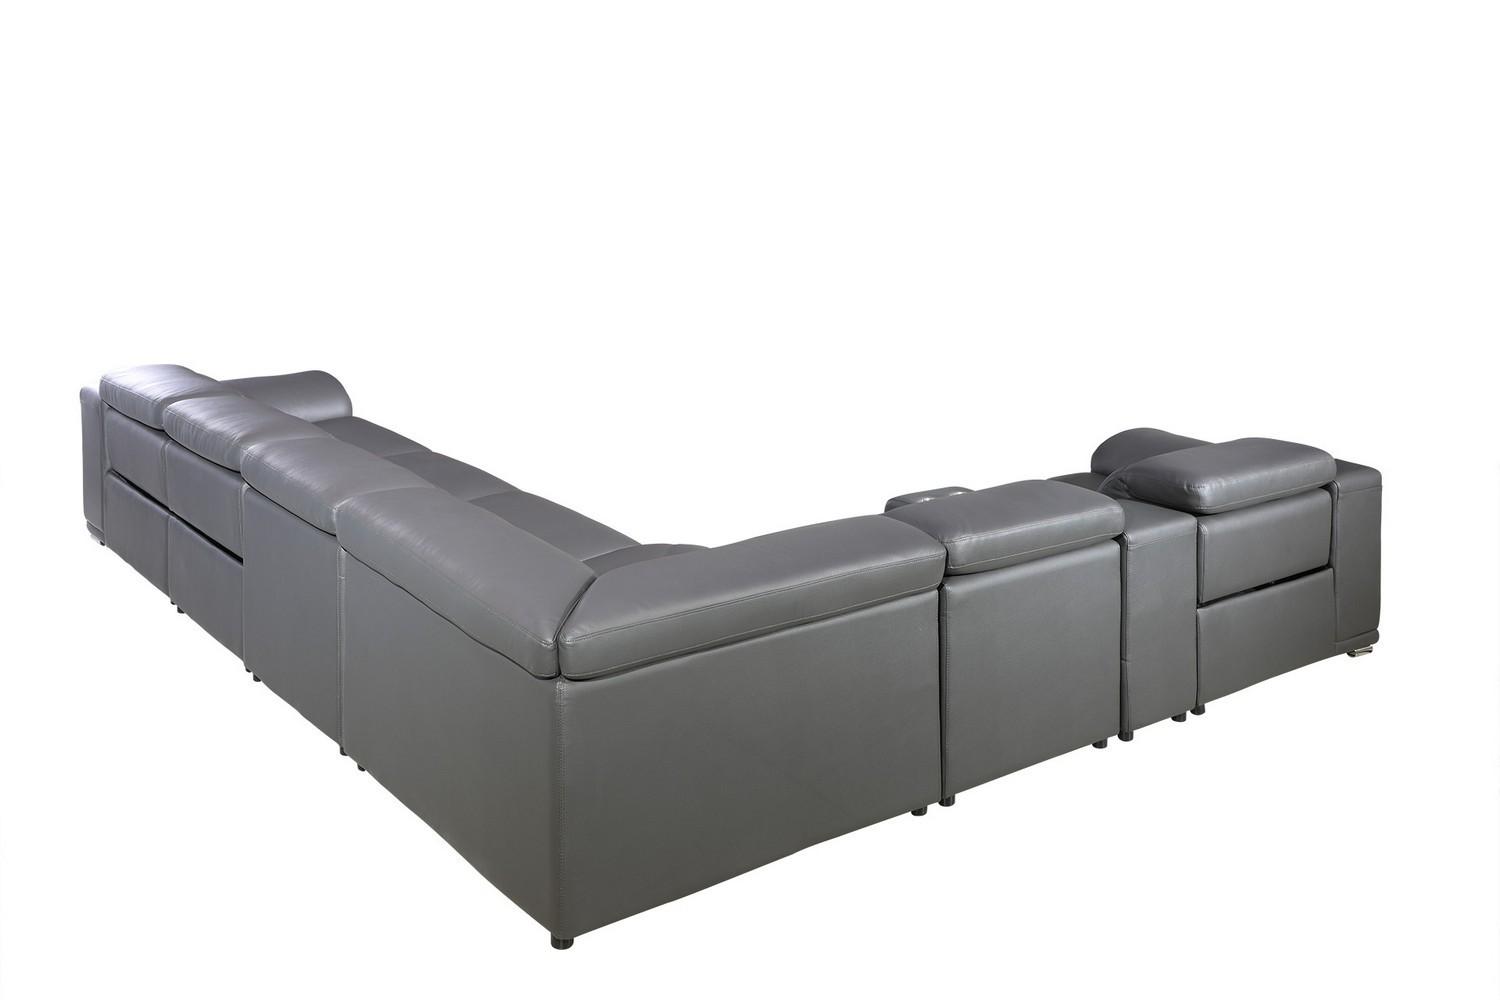 

    
9762-GRAY-3PWR-7PC DARK GREY 3-Power Reclining 7PC Sectional w/ 1-Console 9762 Global United
